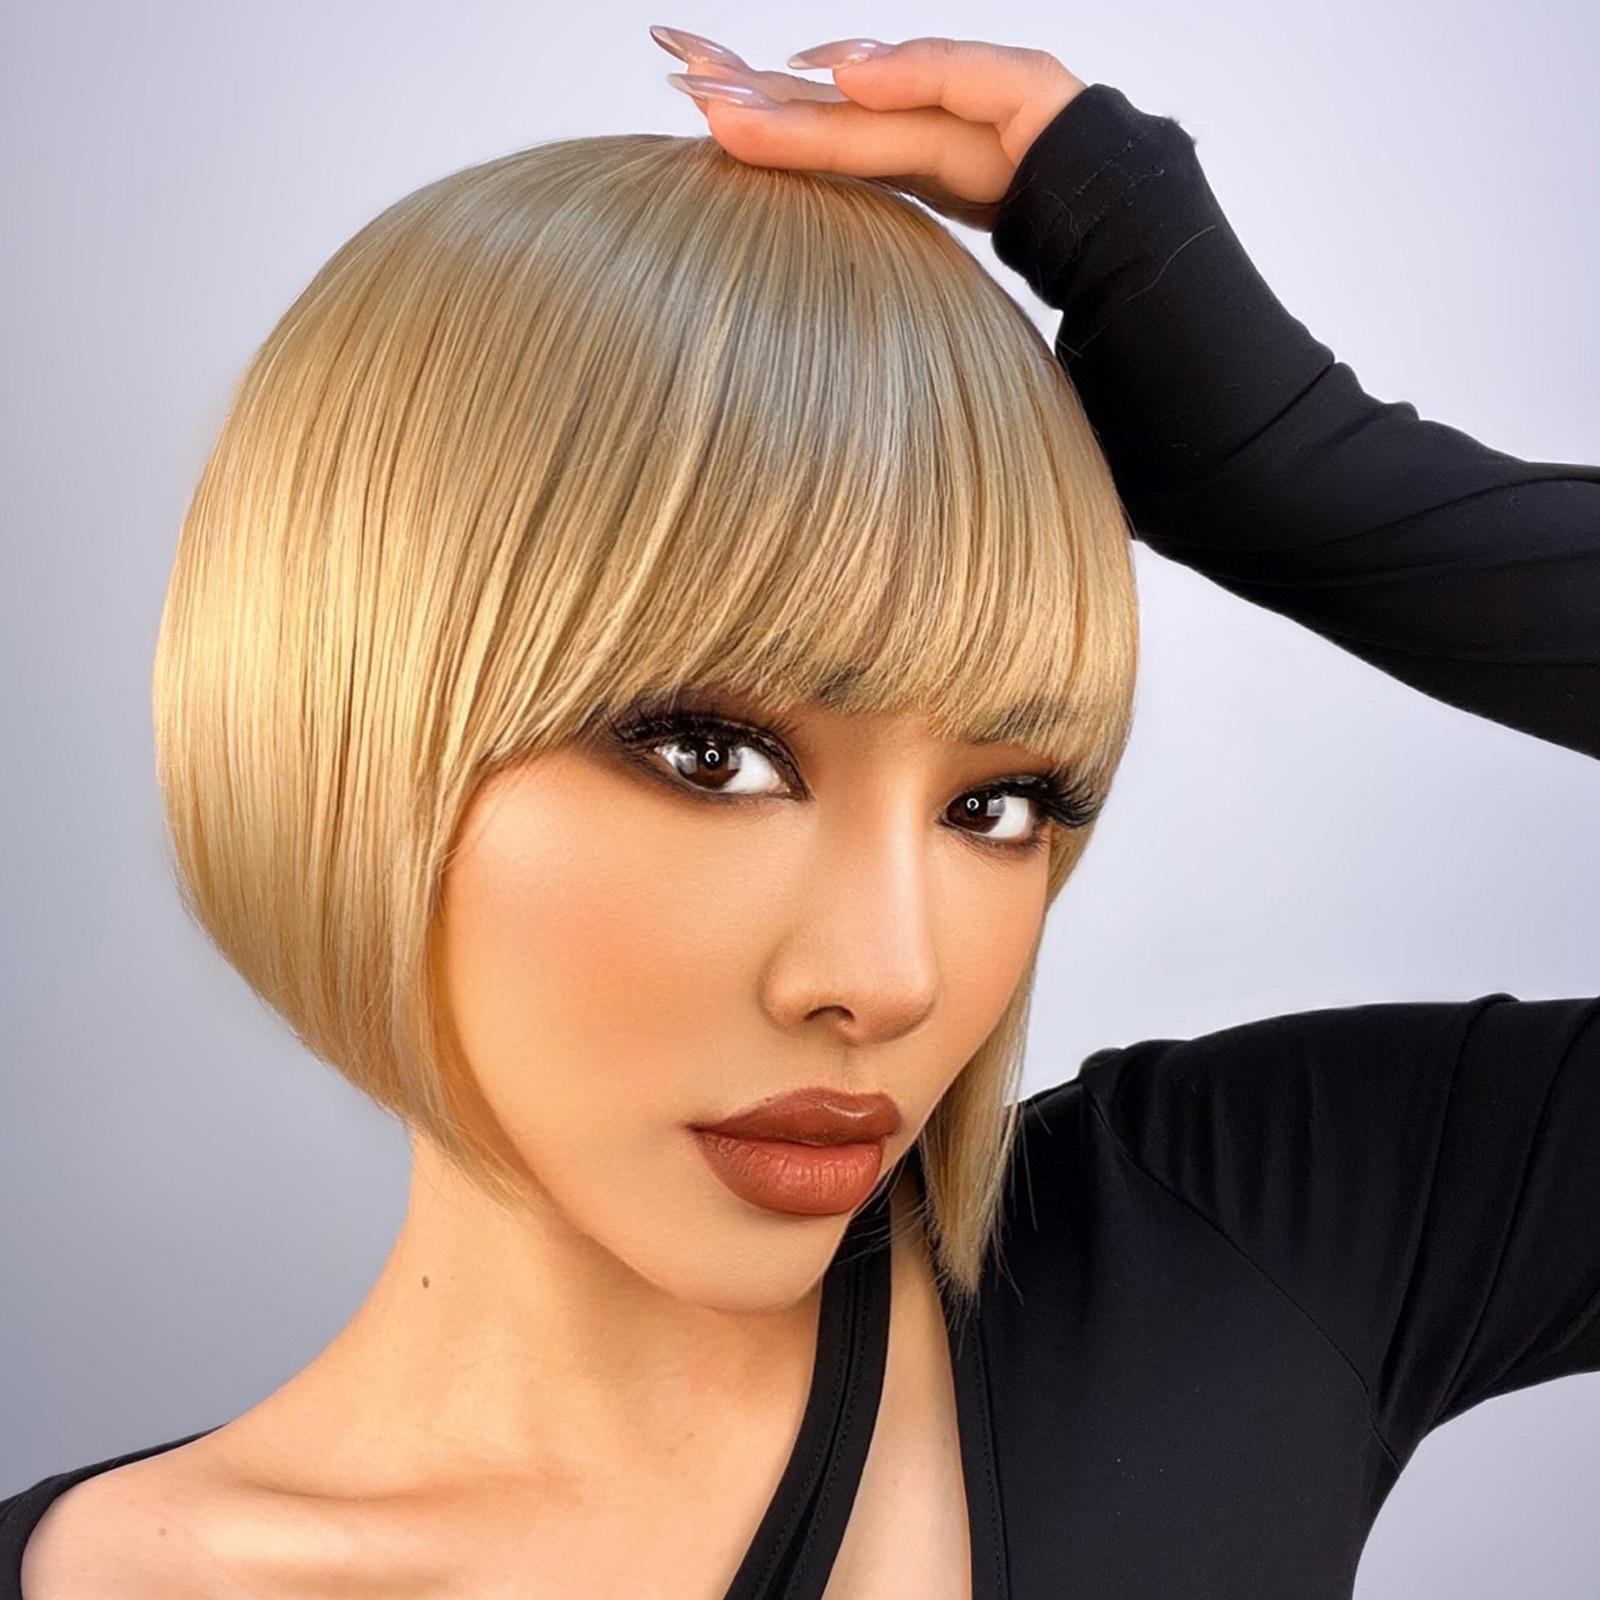 

Short Straight Blonde Hair Bob Hair Wigs With Bangs, Fancy Synthetic Wigs Party Costume Heat Friendly Wigs